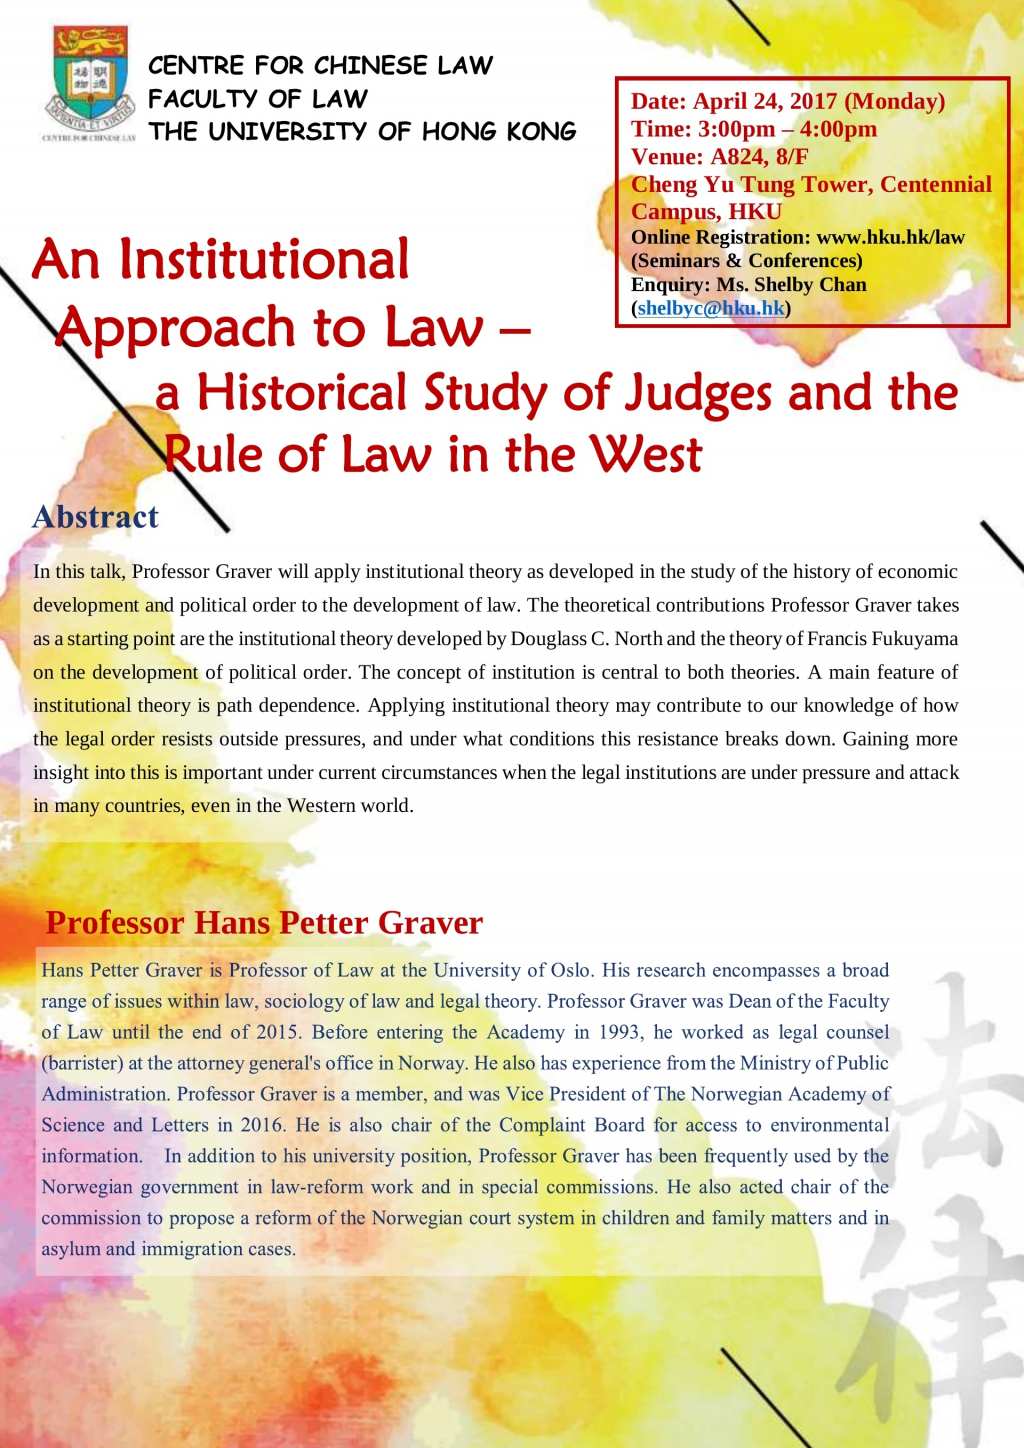 An Institutional Approach to Law - a Historical Study of Judges and the Rule of Law in the West